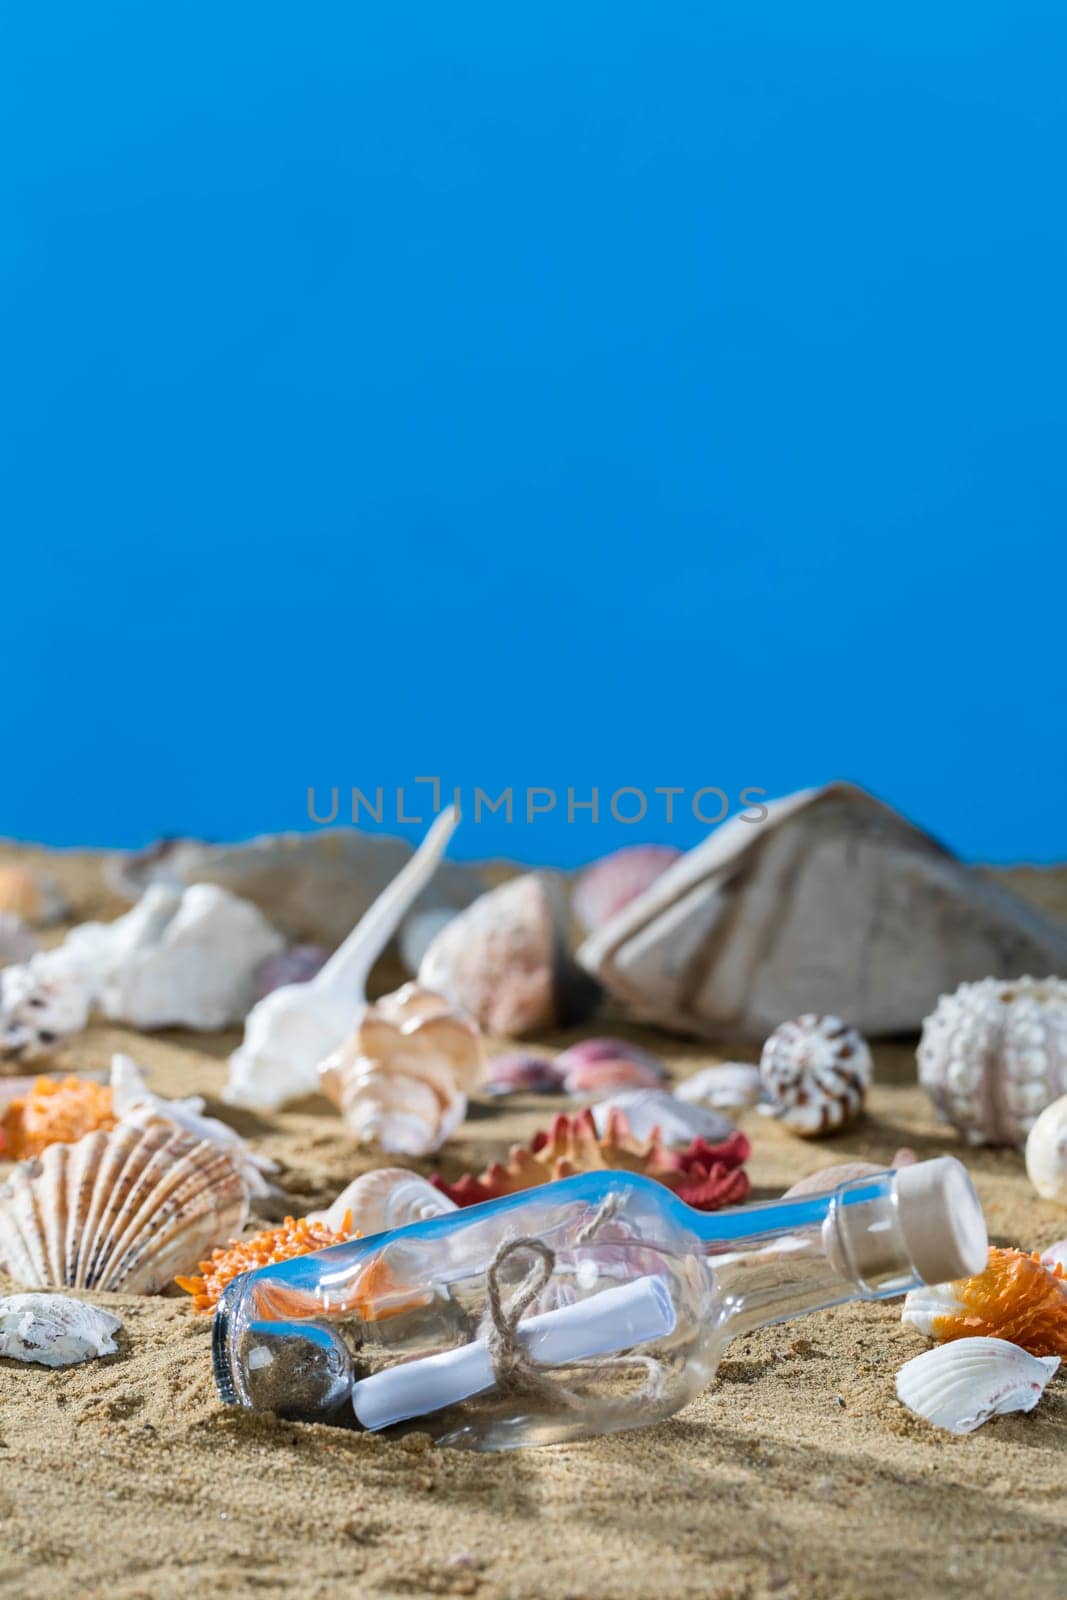 A glass bottle with a letter washed up on the beach shore. Sea beach full of shells and sand. Blue sky. by fotodrobik